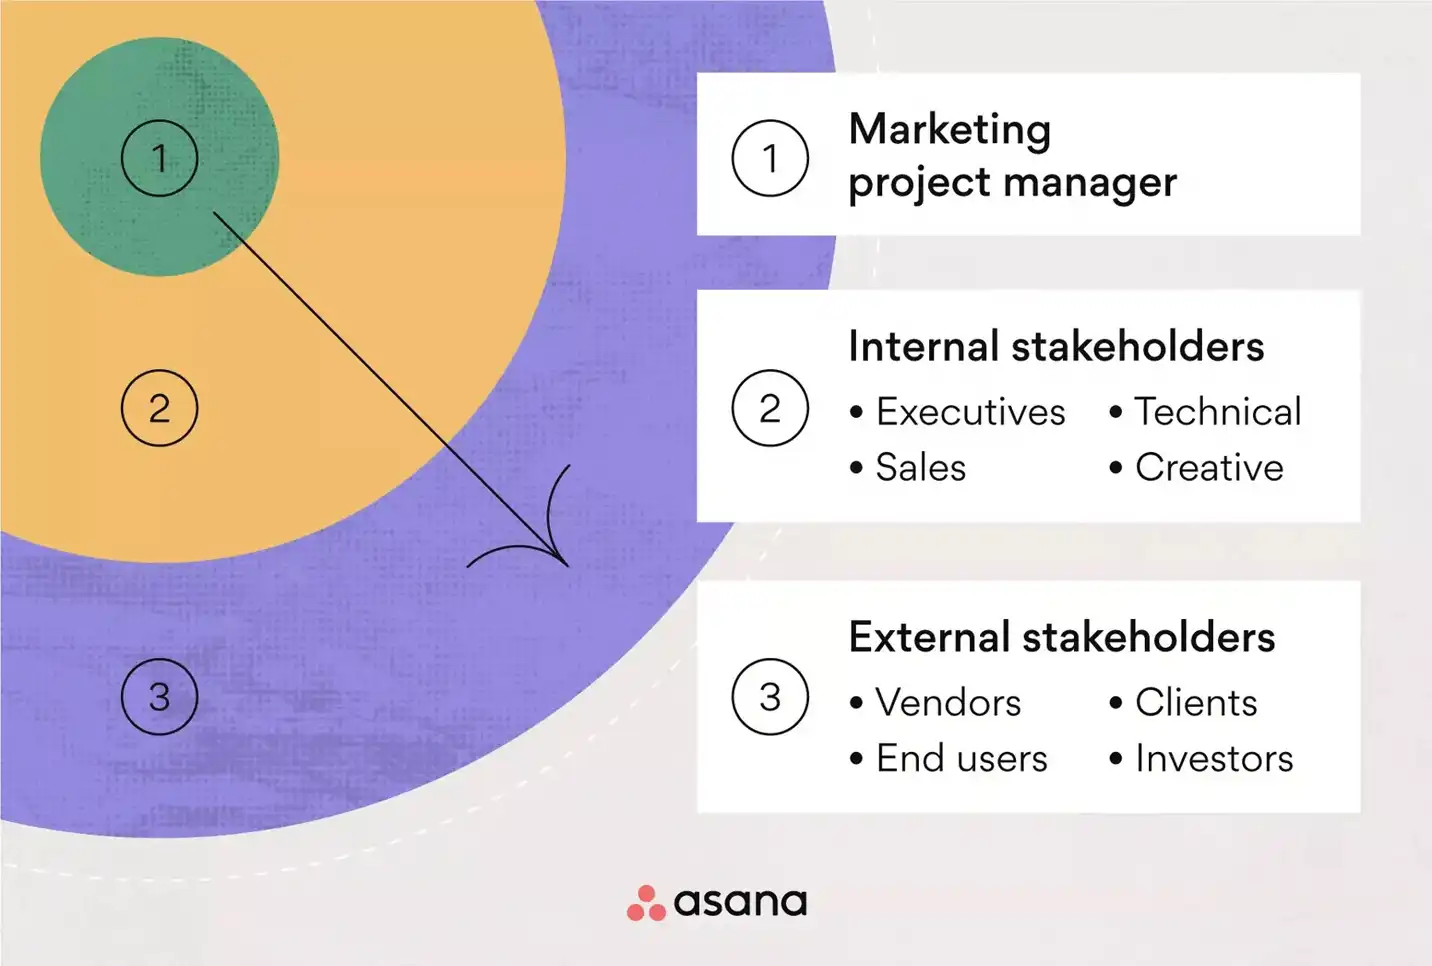 A well-crafted design asset from Asana